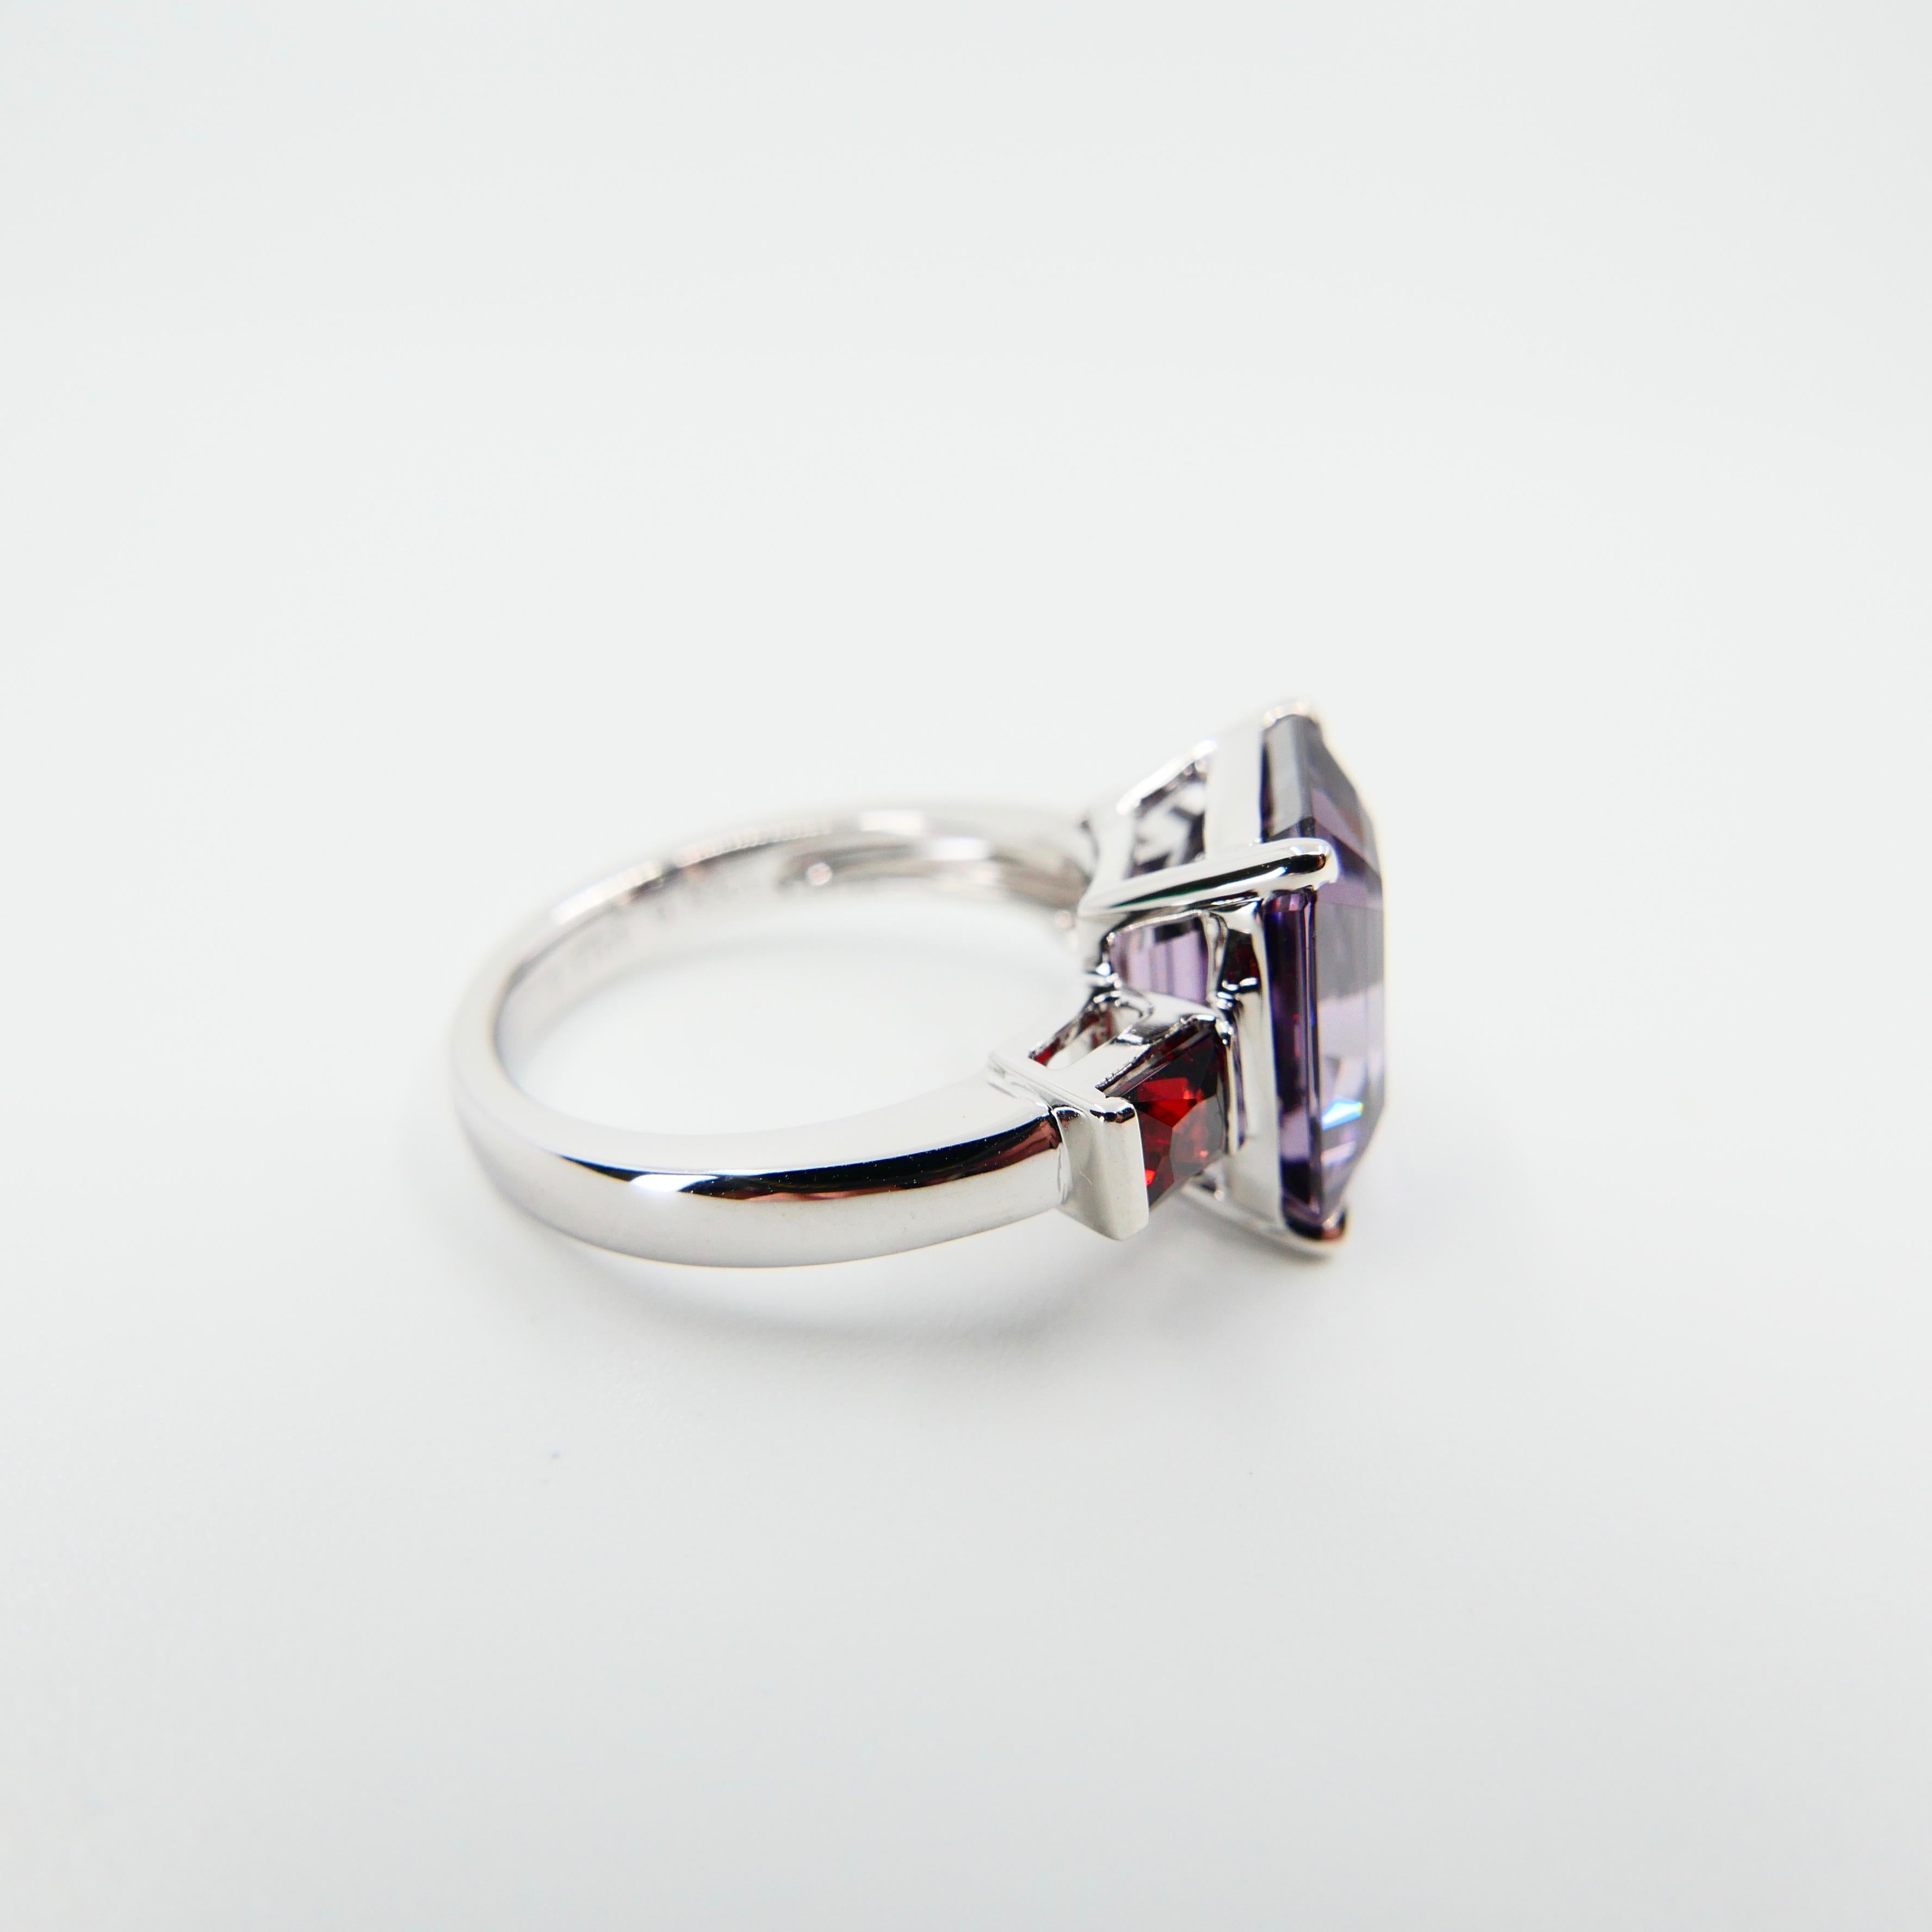 Natural 7.77 Cts Purple Spinel & 0.83 Carat Red Spinel Three-Stone Cocktail Ring 2